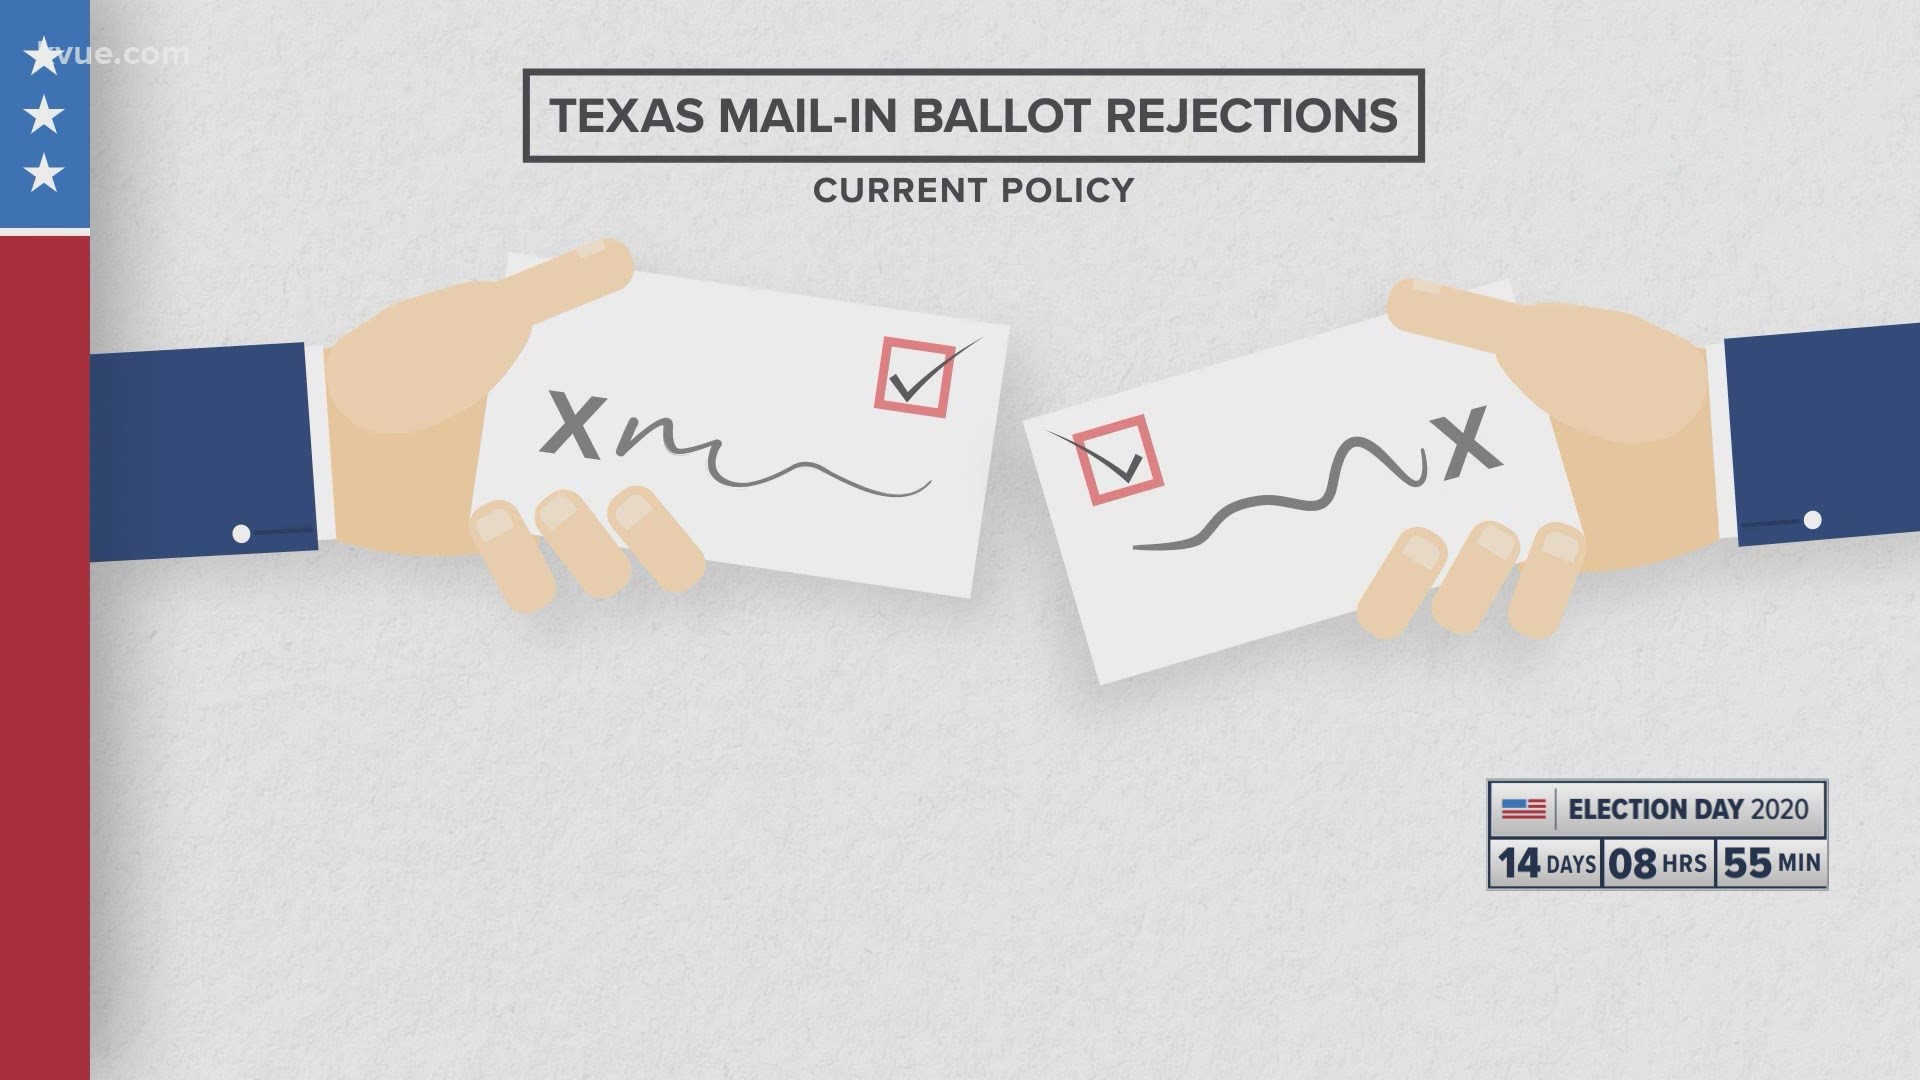 Texas counties will be able to reject mail-in ballots over mismatched signatures thanks to a court ruling.